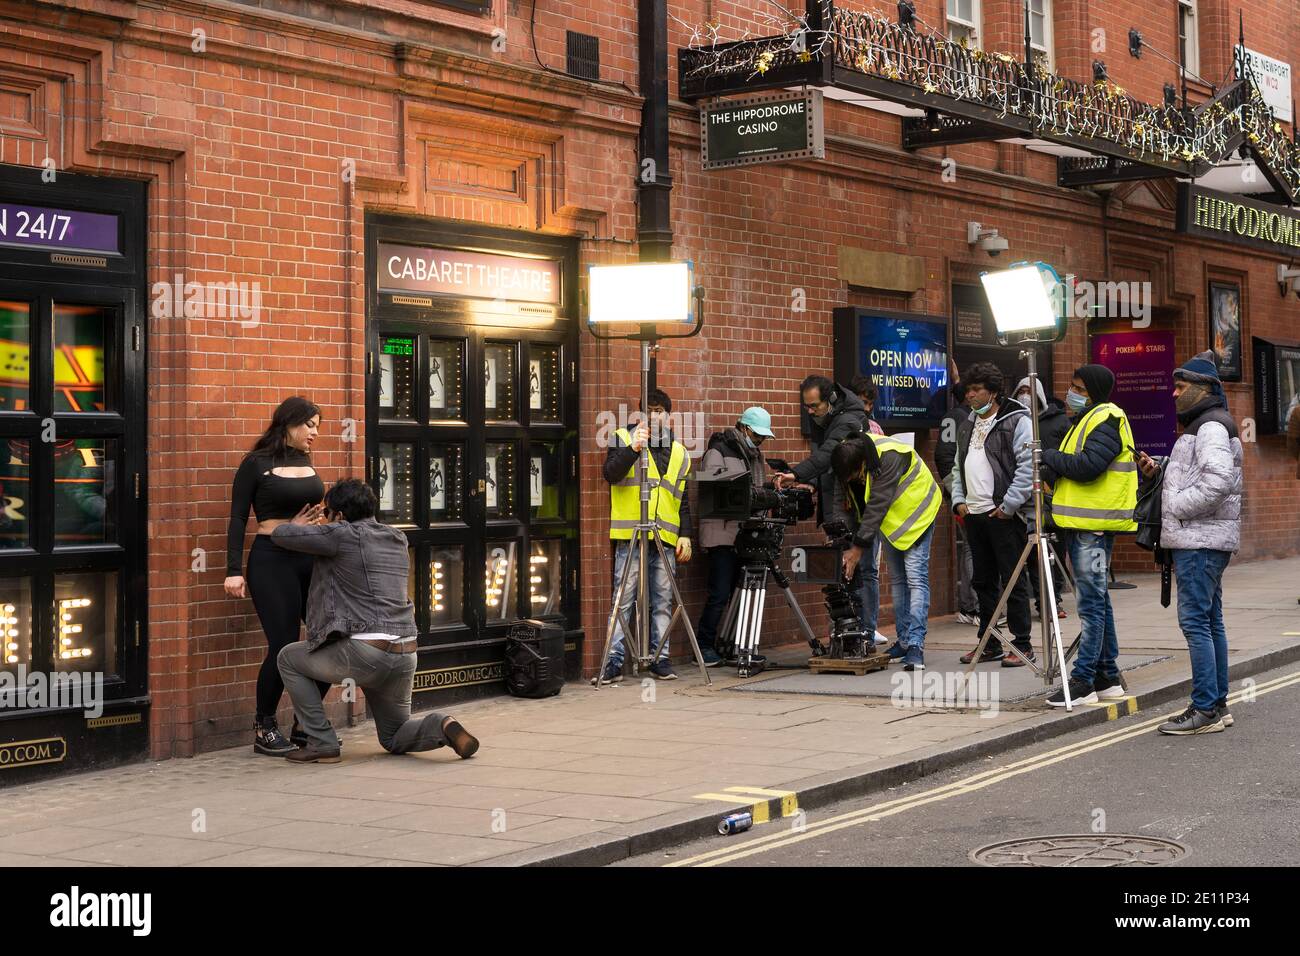 A small Bollywood production being filmed on the street behind the Hippodrome Casino. London Stock Photo